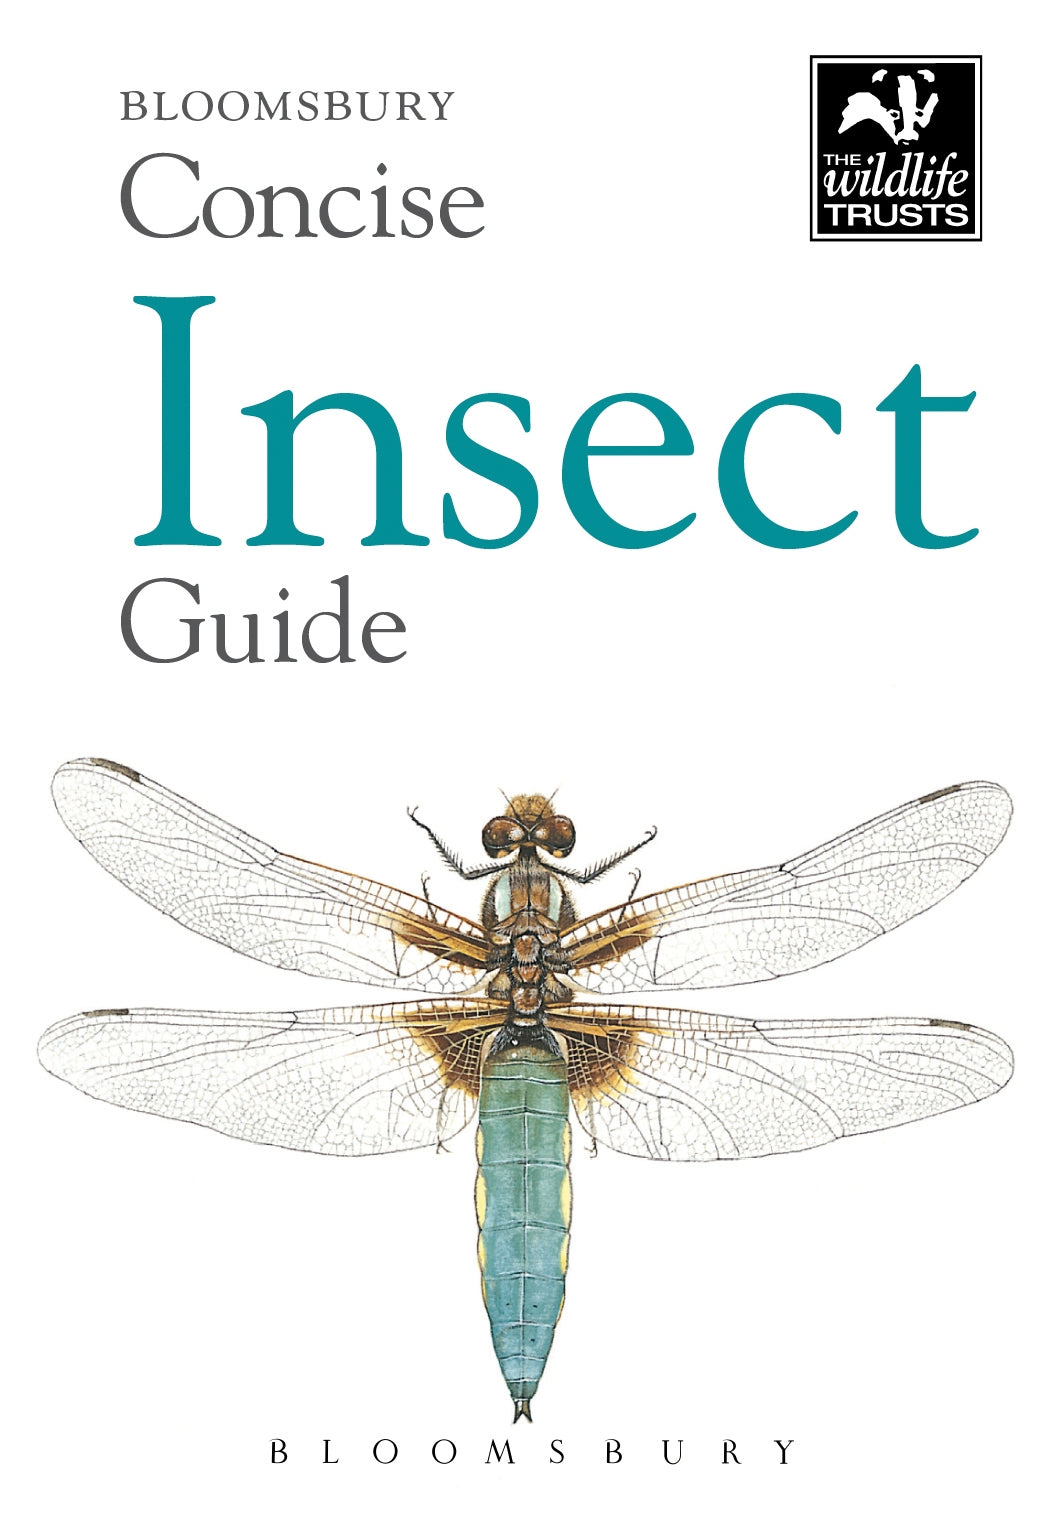 Bloomsbury concise guide - insect